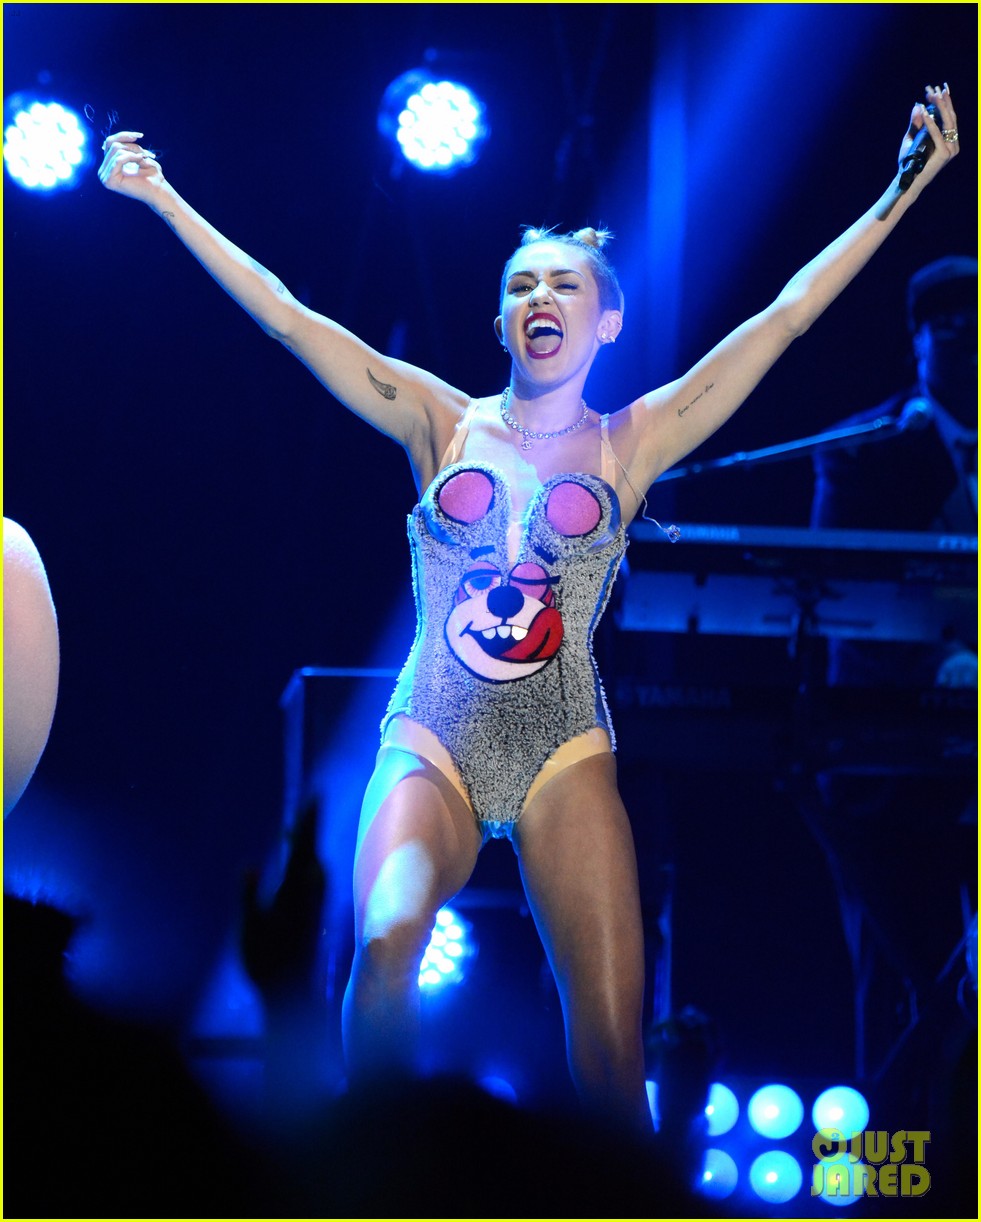 Miley Cyrus in MTV Video Music Awards 2013